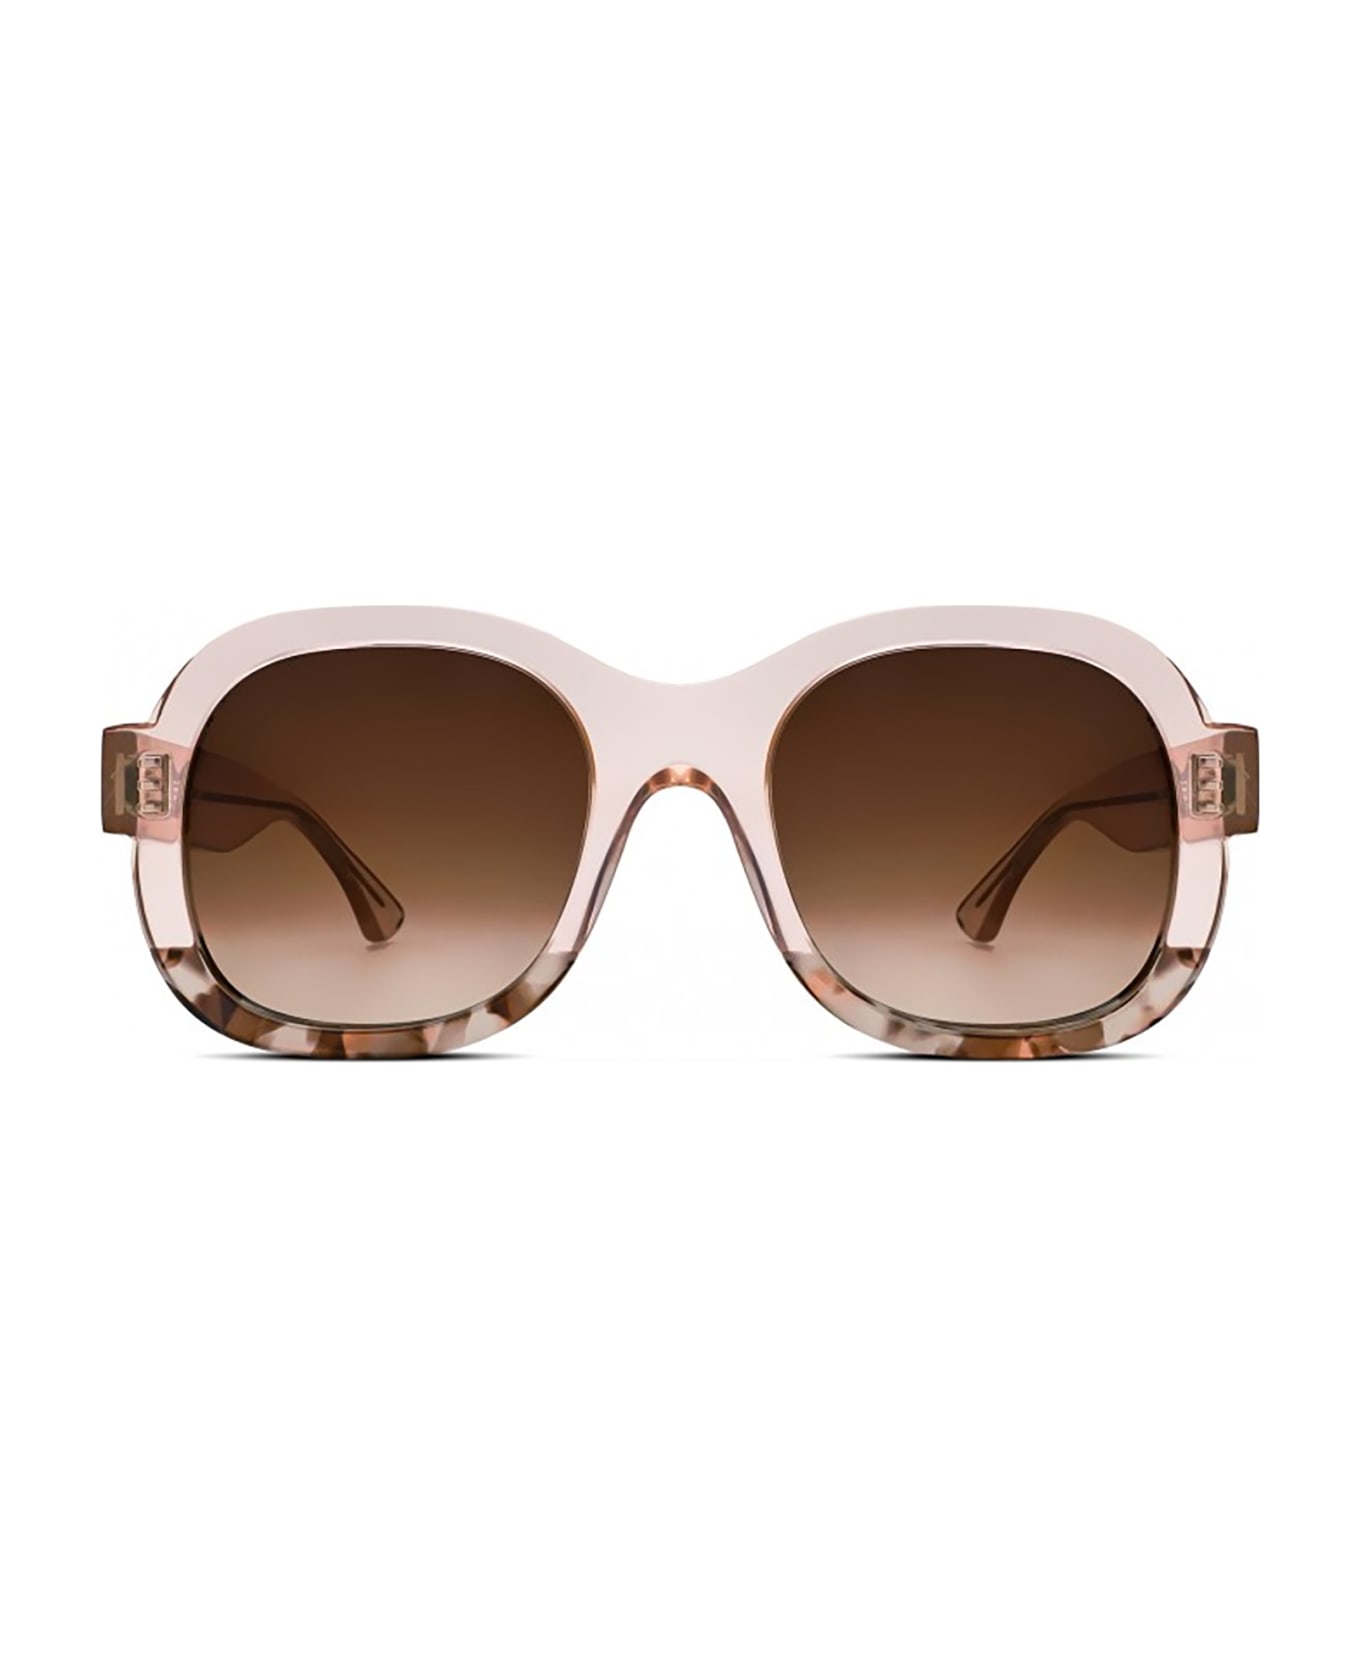 Thierry Lasry DAYDREAMY Sunglasses